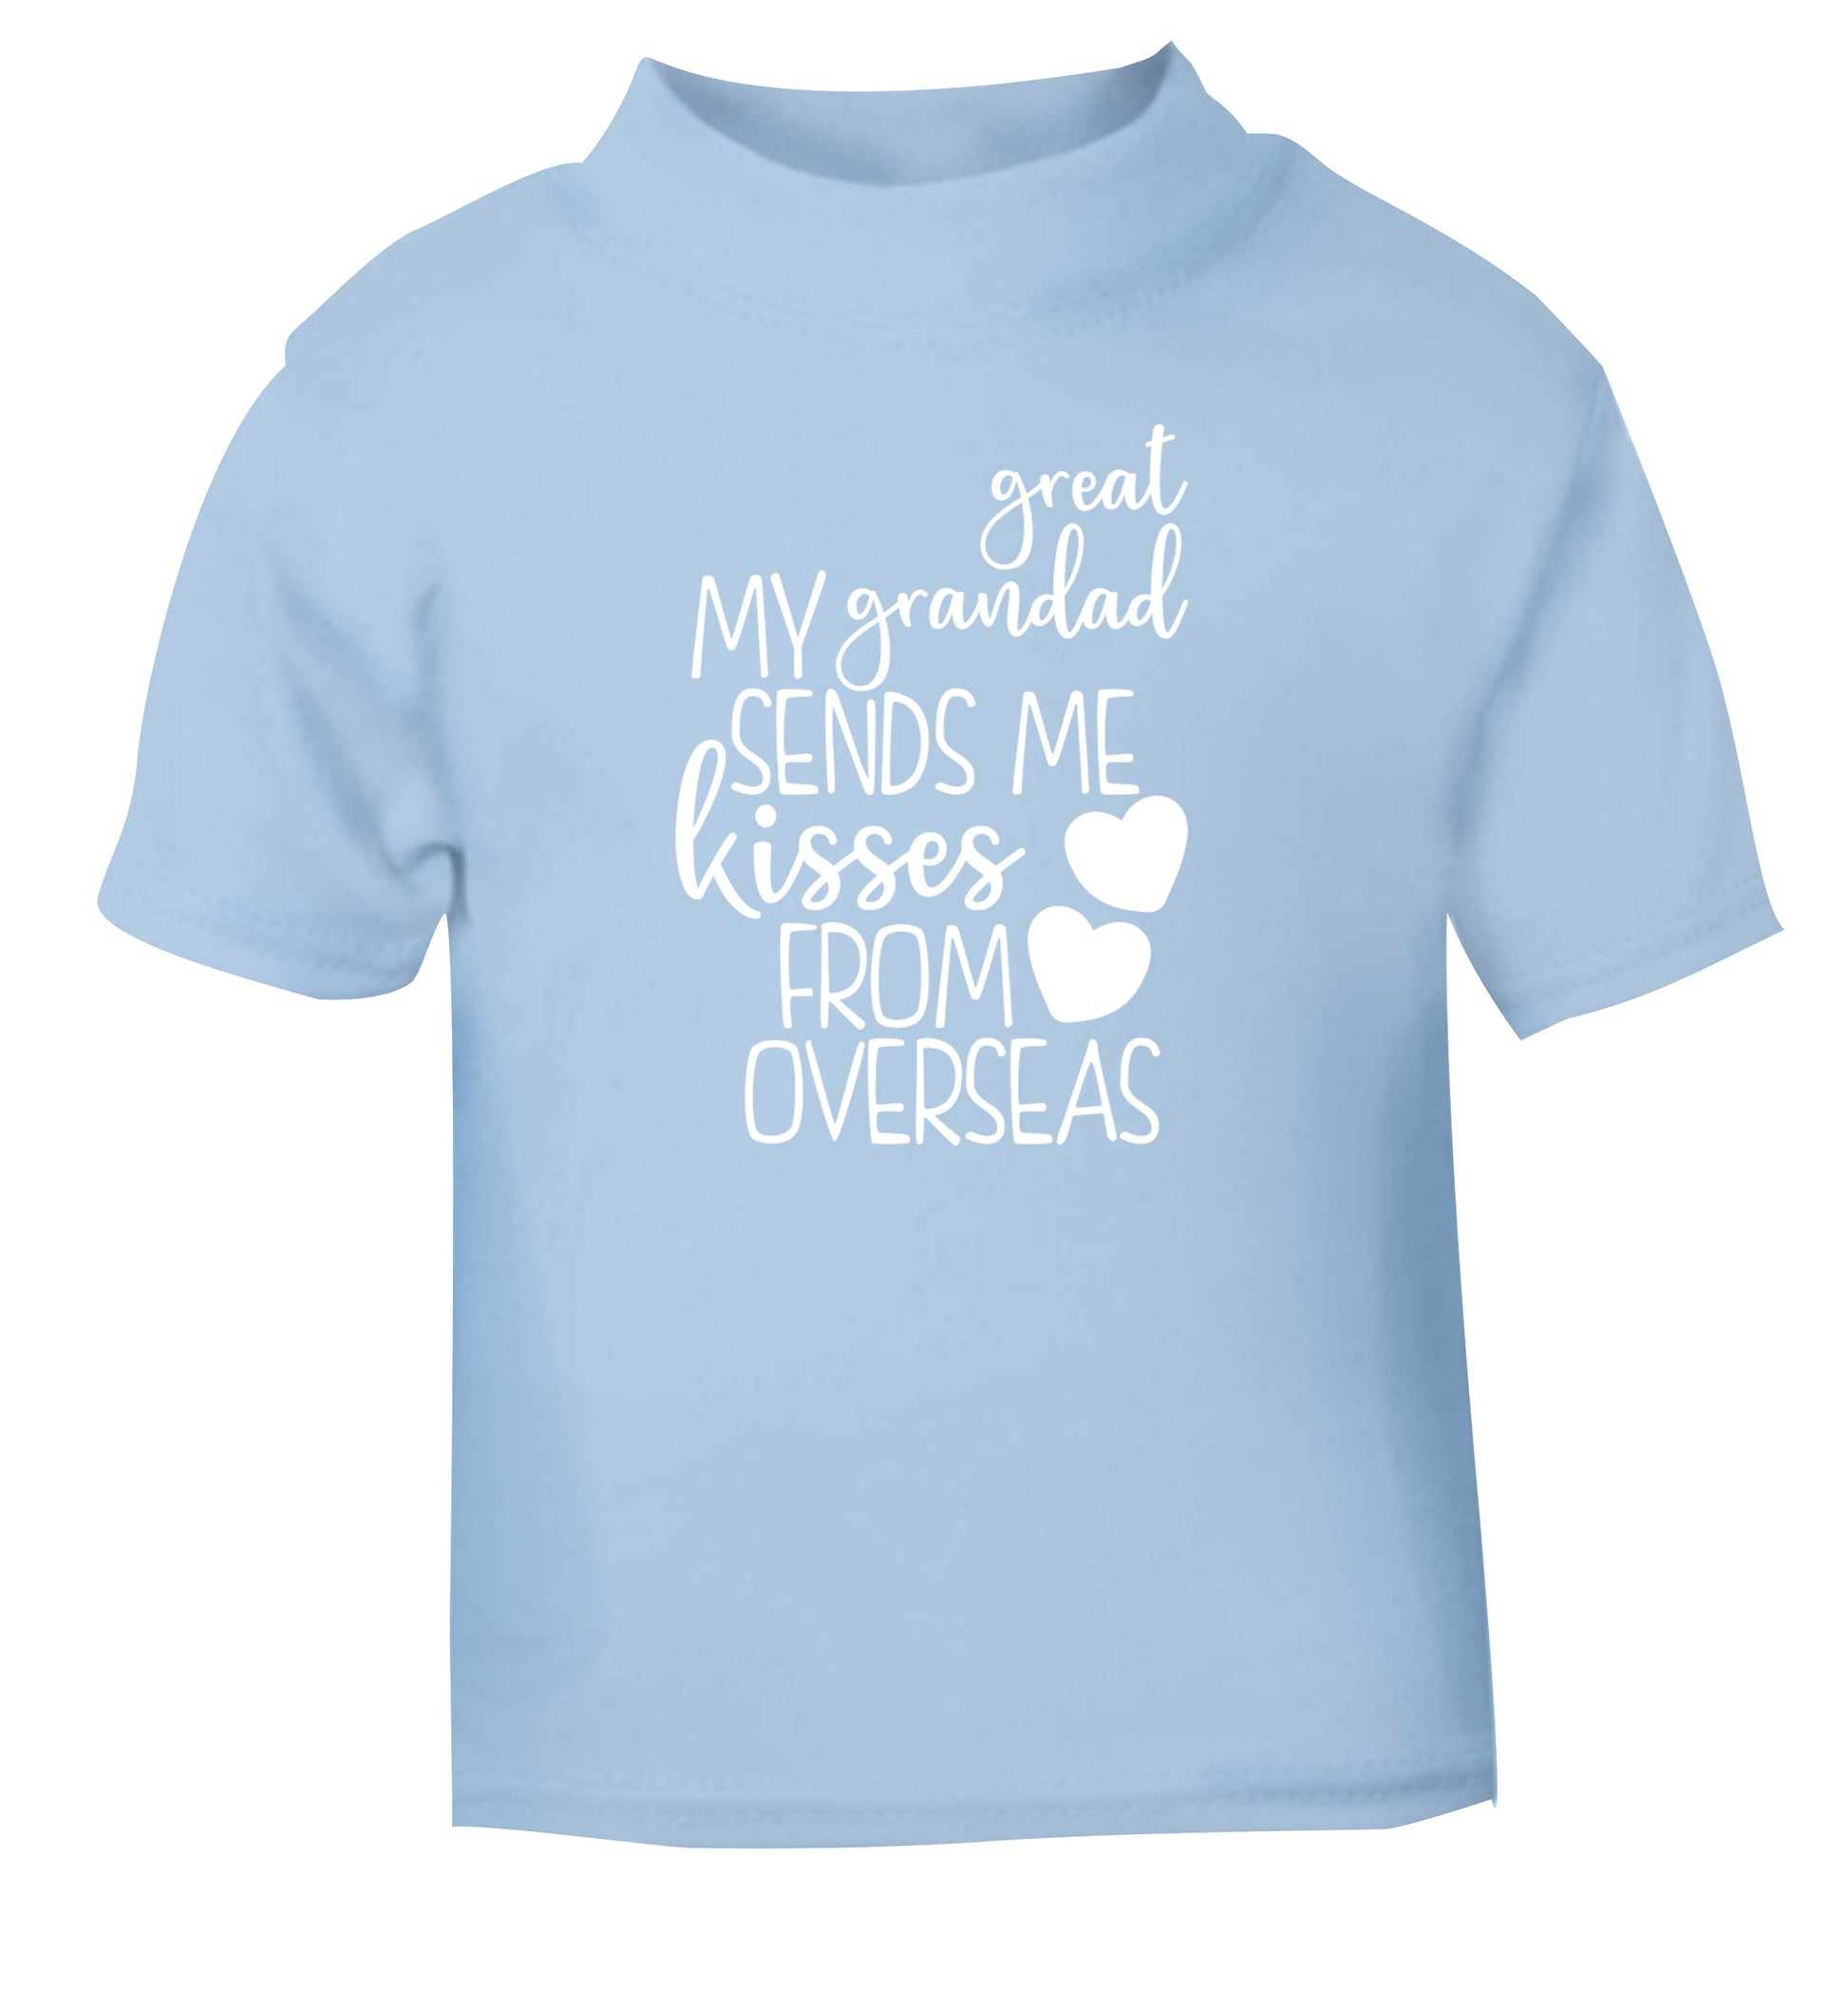 My great grandad sends me kisses from overseas light blue Baby Toddler Tshirt 2 Years